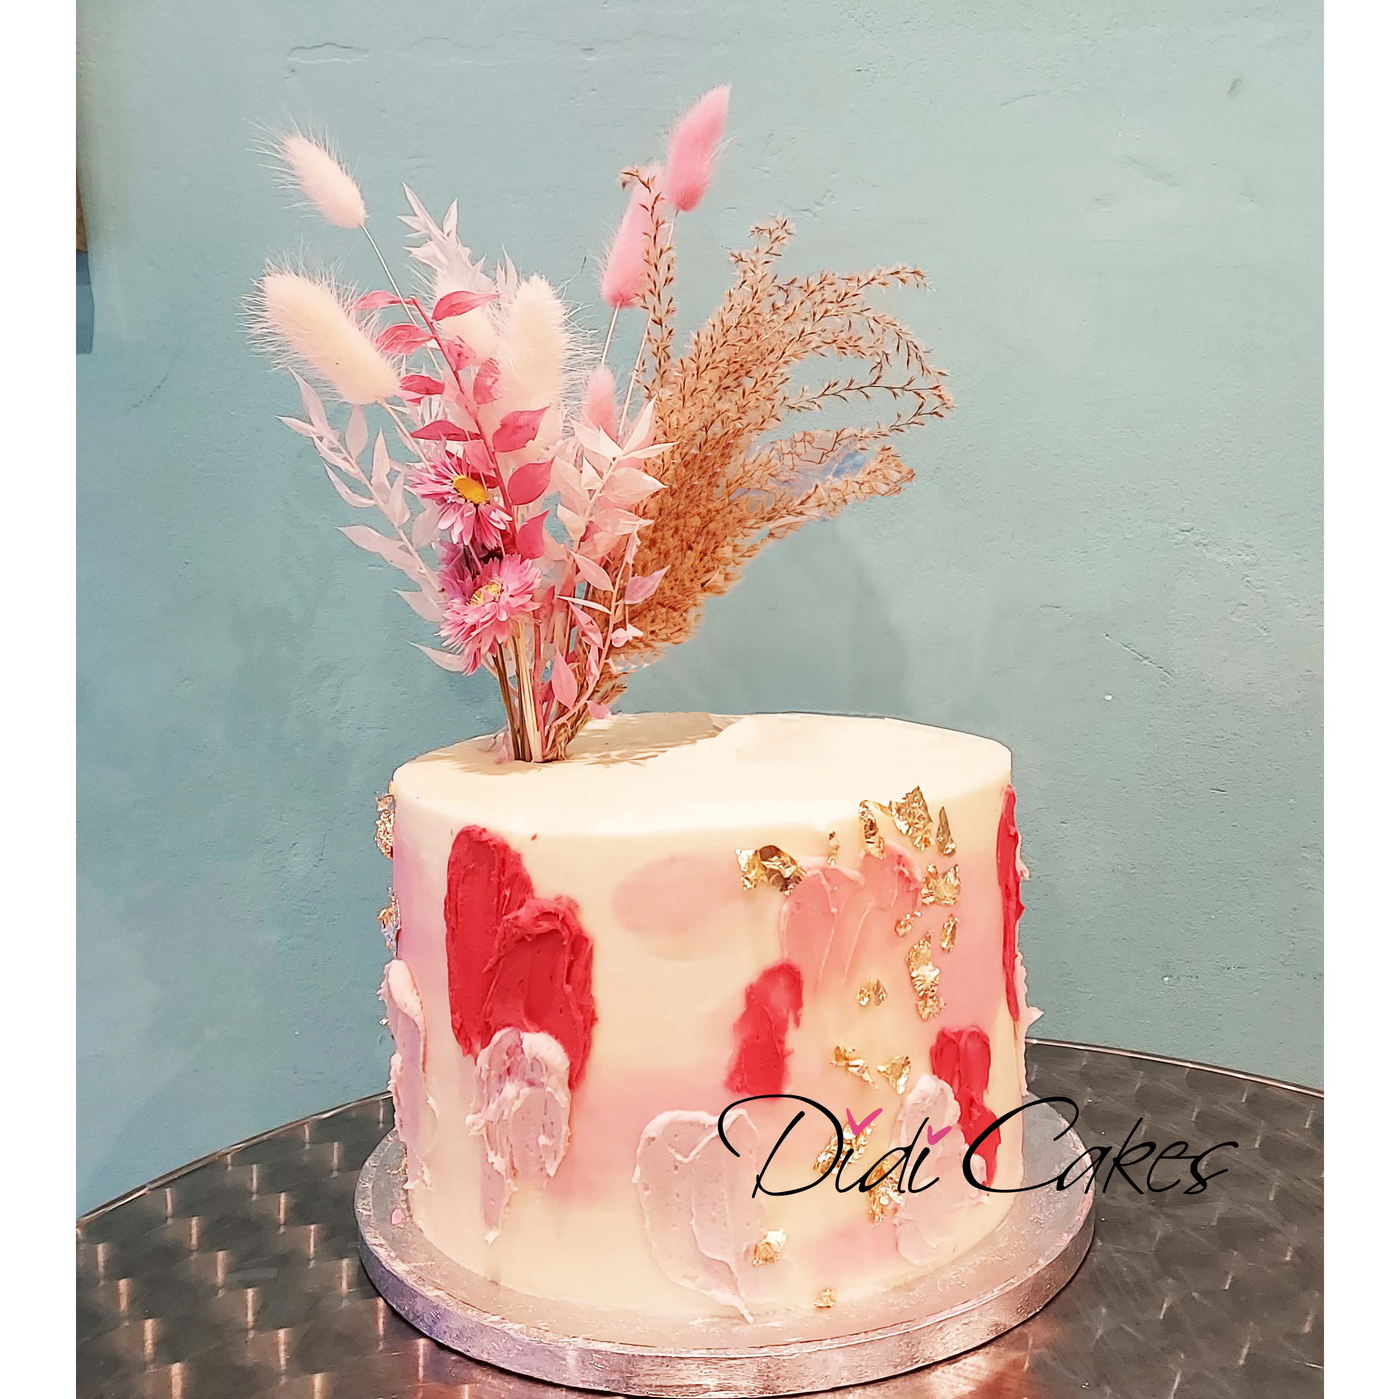 Stunning dried flower topper cake serving 20 portions